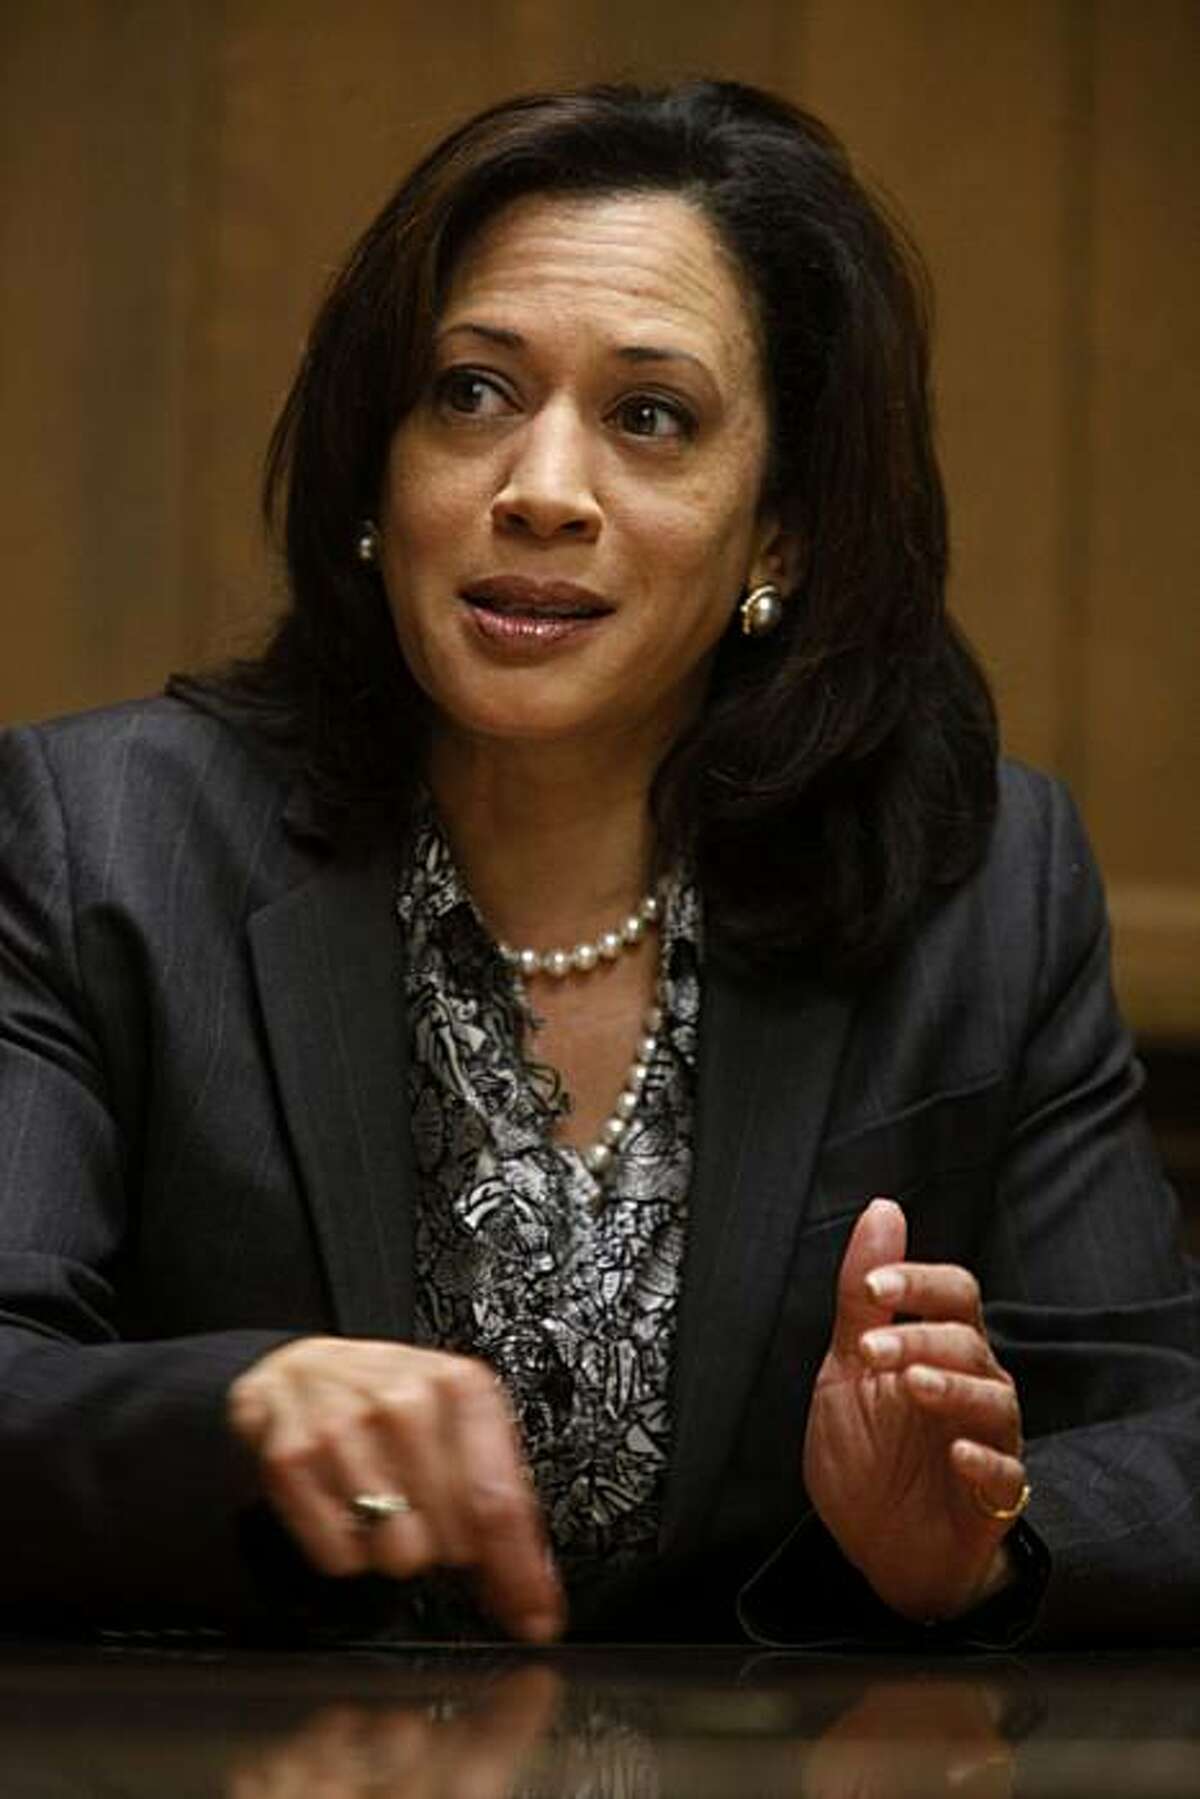 San Francisco District Attorney Kamala Harris, who is running for state Attorney General, speaks with the San Francisco Chronicle editorial board at the Chronicle on Thursday April 22, 2010 in San Francisco, Calif.